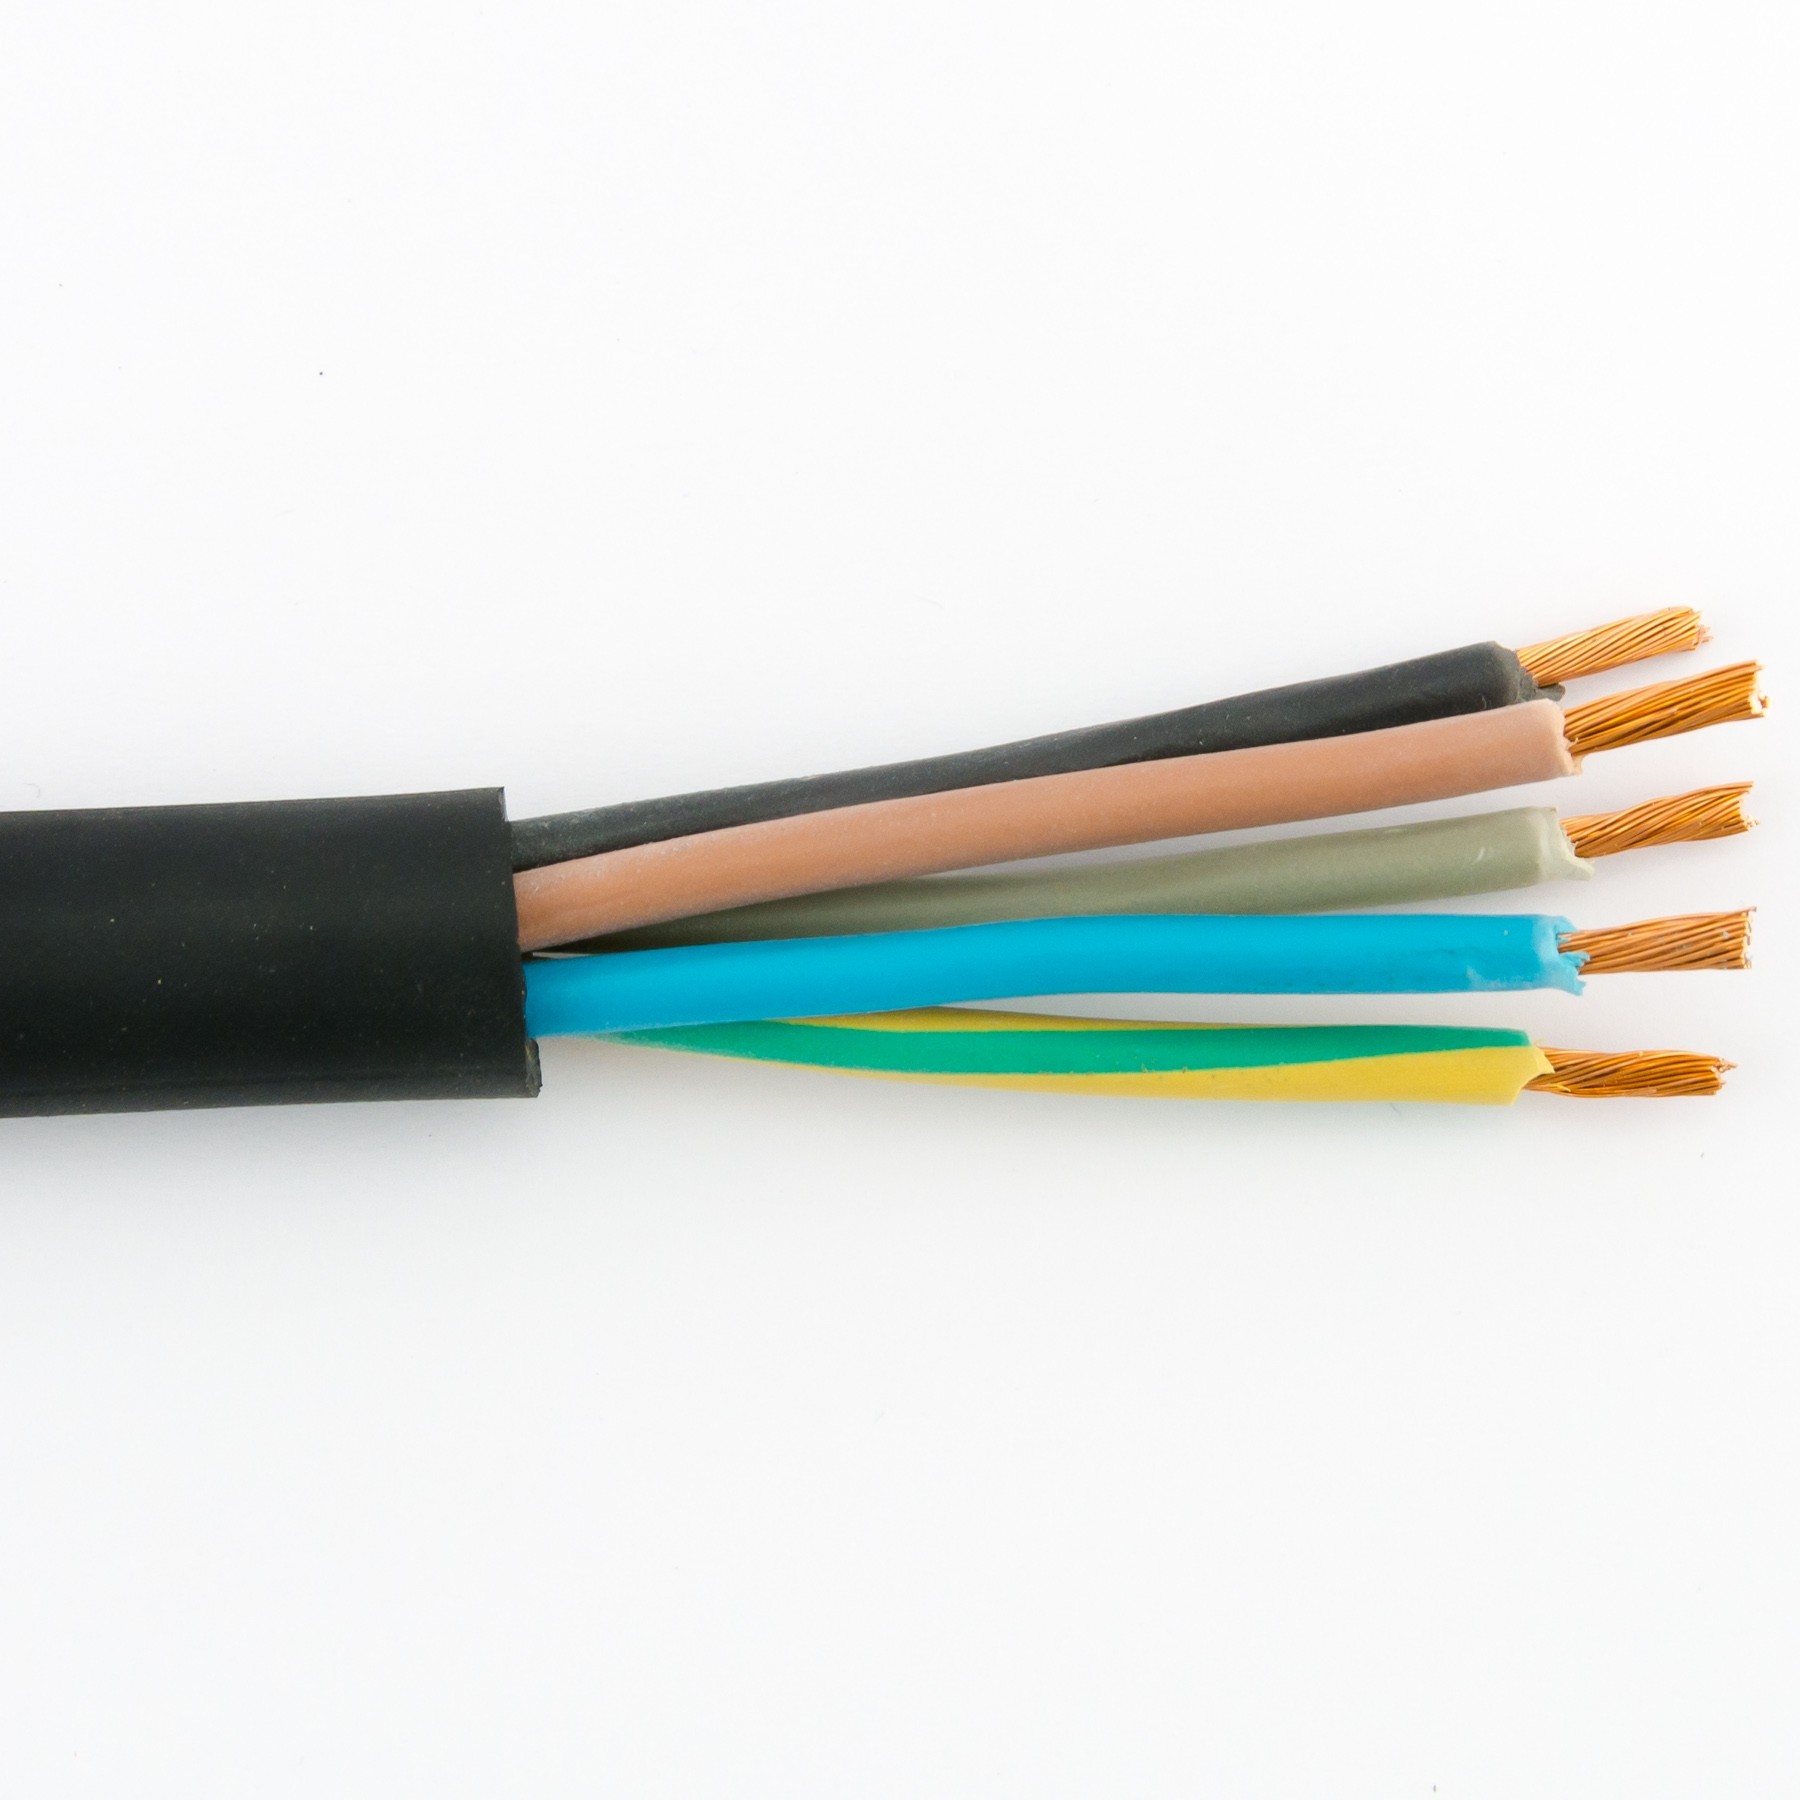 5x2.5mm² neoprene cable heating element